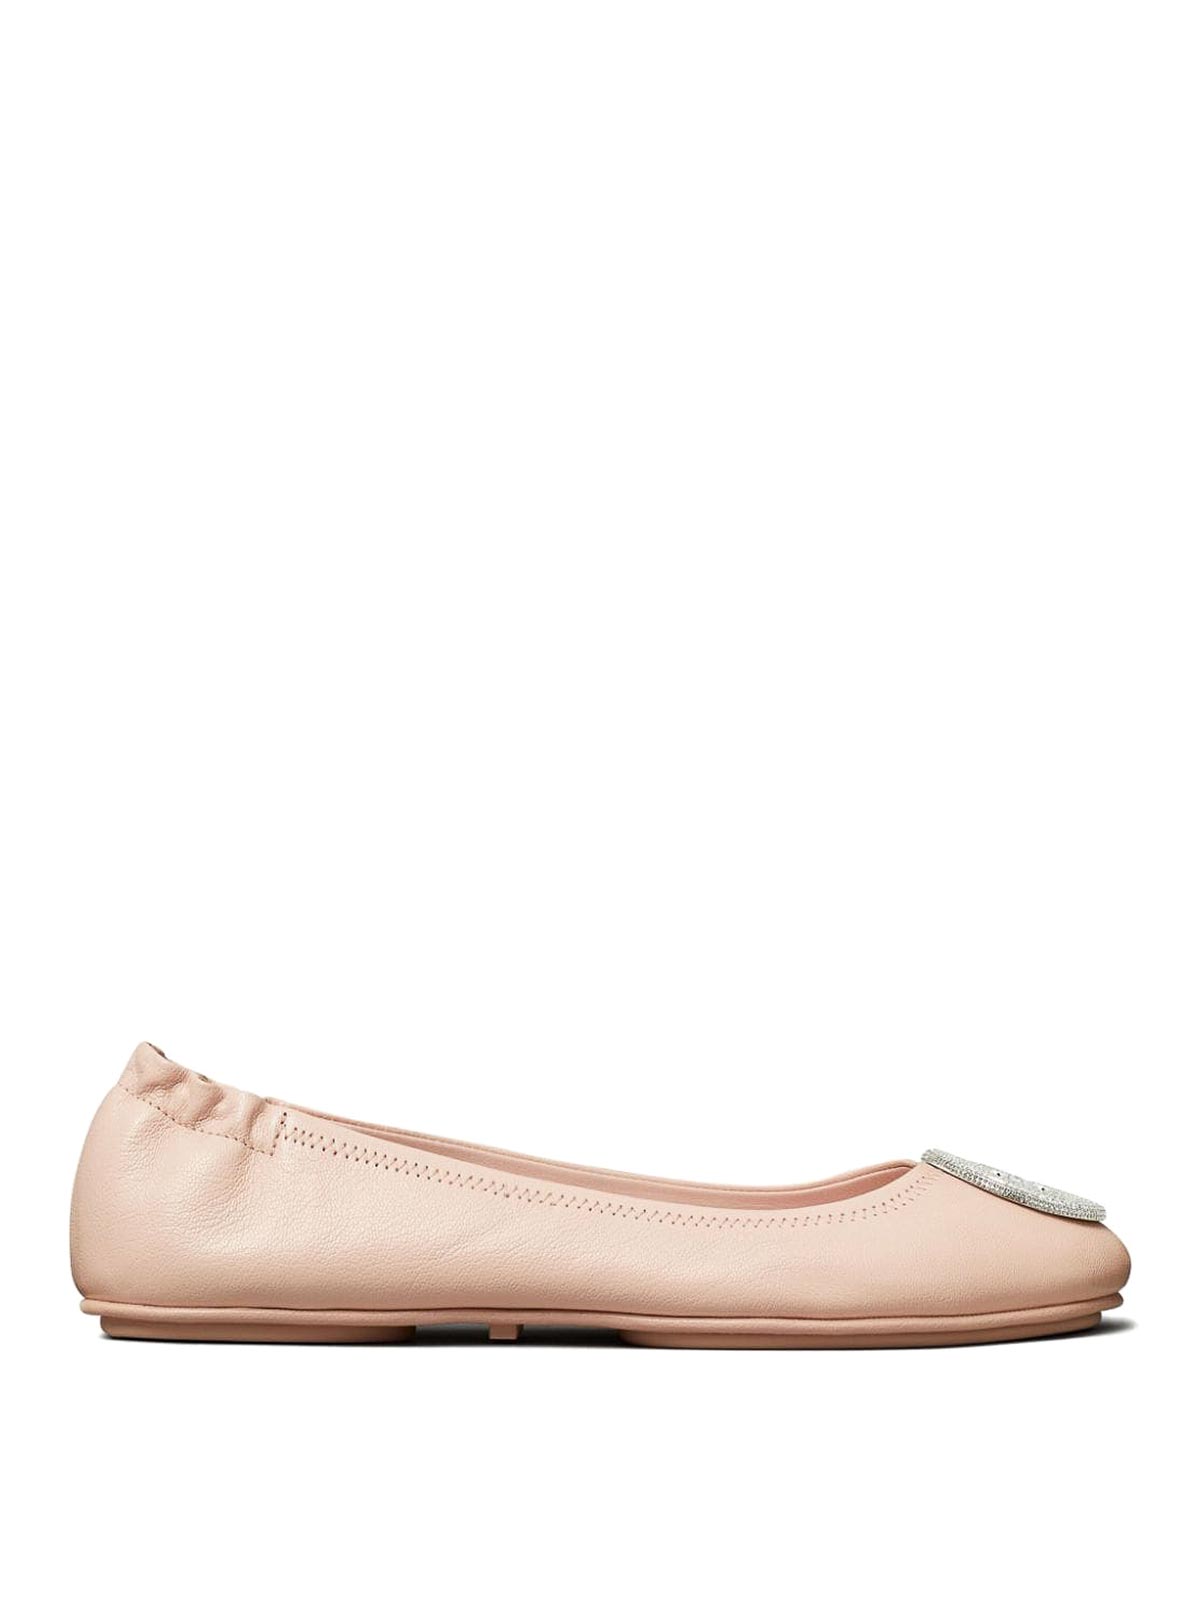 Tory Burch Minnie Leather Ballet Flats In Light Pink